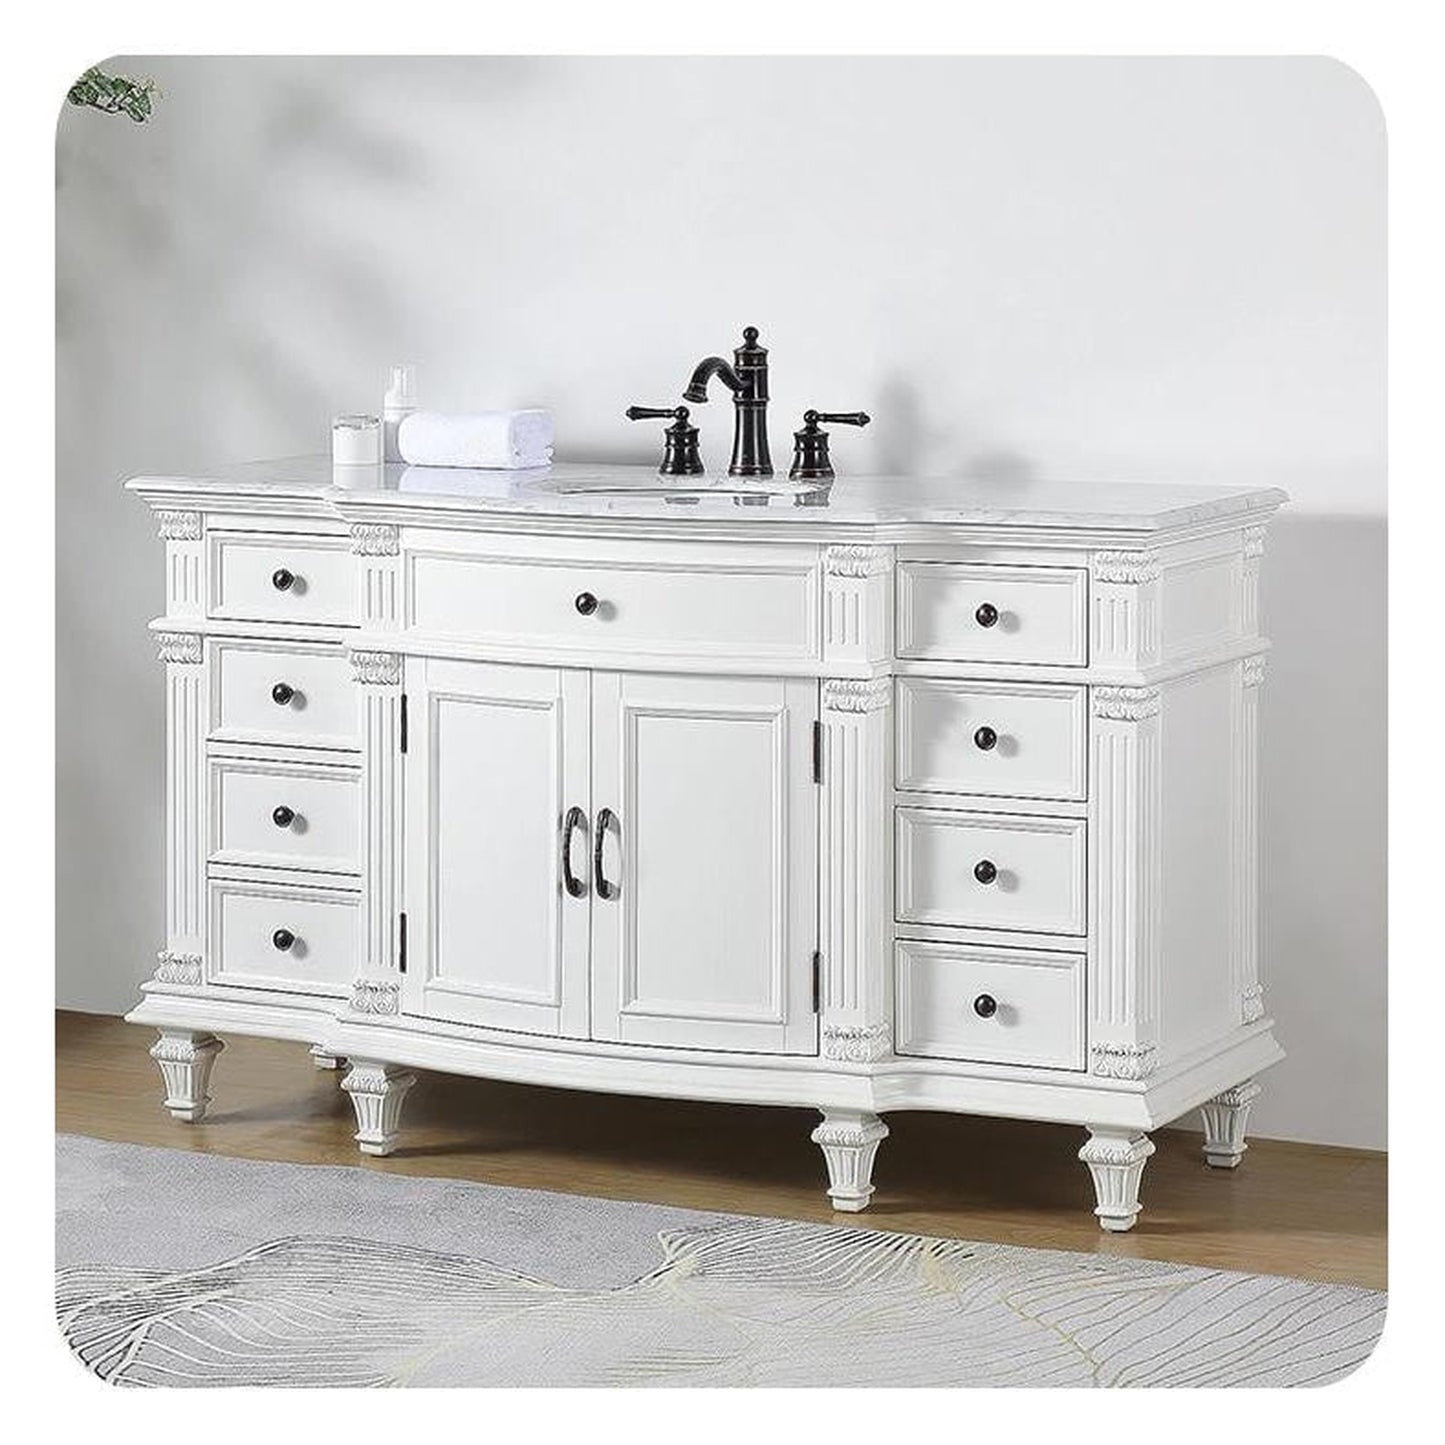 Silkroad Exclusive 60" Single Sink Antique White Bathroom Vanity With Carrara White Marble Countertop and White Ceramic Undermount Sink